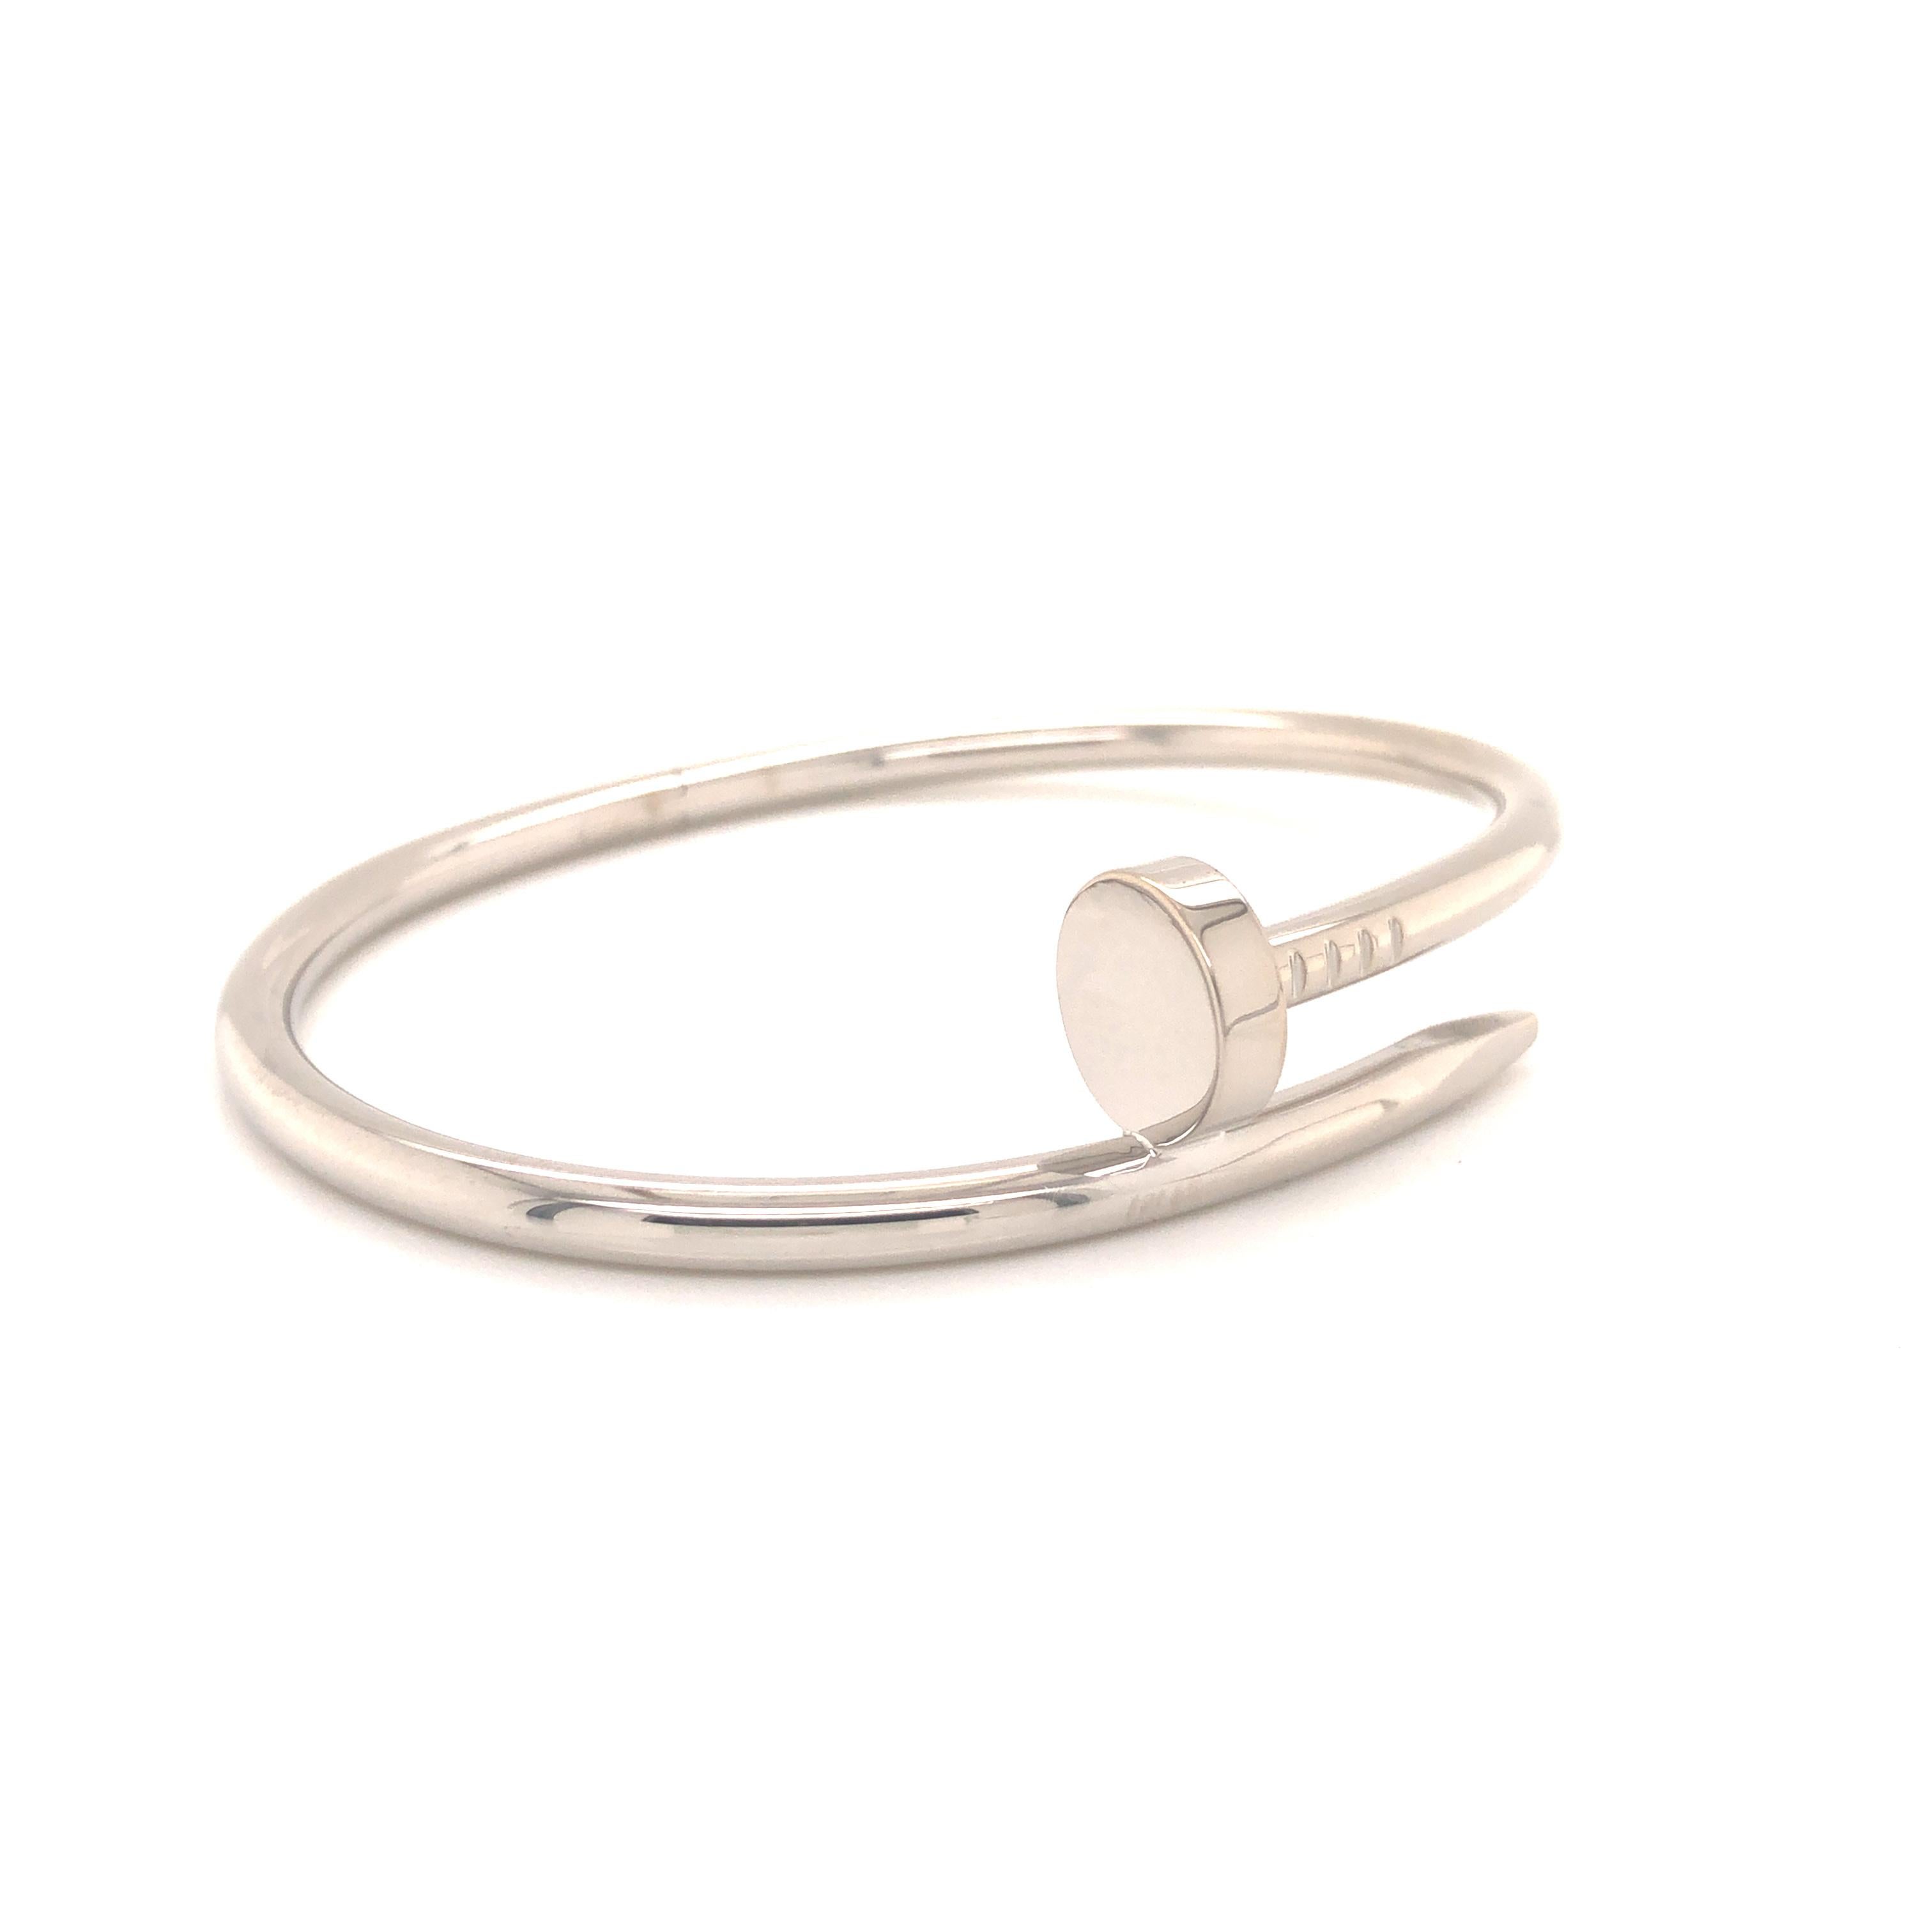 Juste un Clou bracelet, classic, 18K white gold, rhodium-finish. Width: 3.5mm. Bracelet is a size 17 and weighs 34 grams. Bracelet is complete with box, warranty card and original in store receipt. Will arrive to you in like 